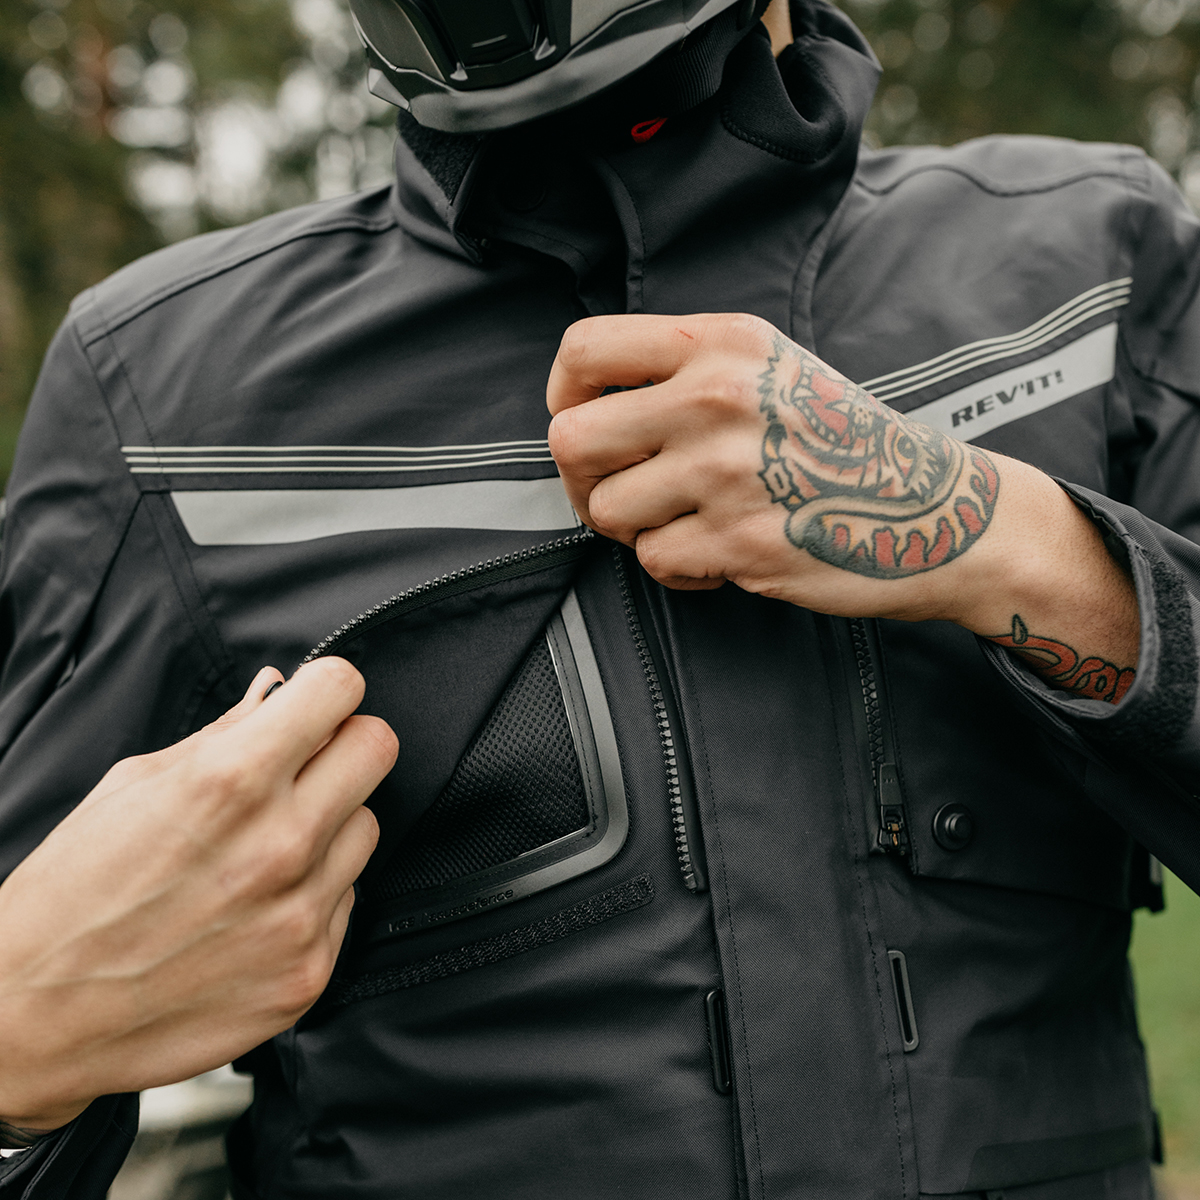 A person with a tattoo on their hand who is zipping up the front pocket of their motorcycle jacket